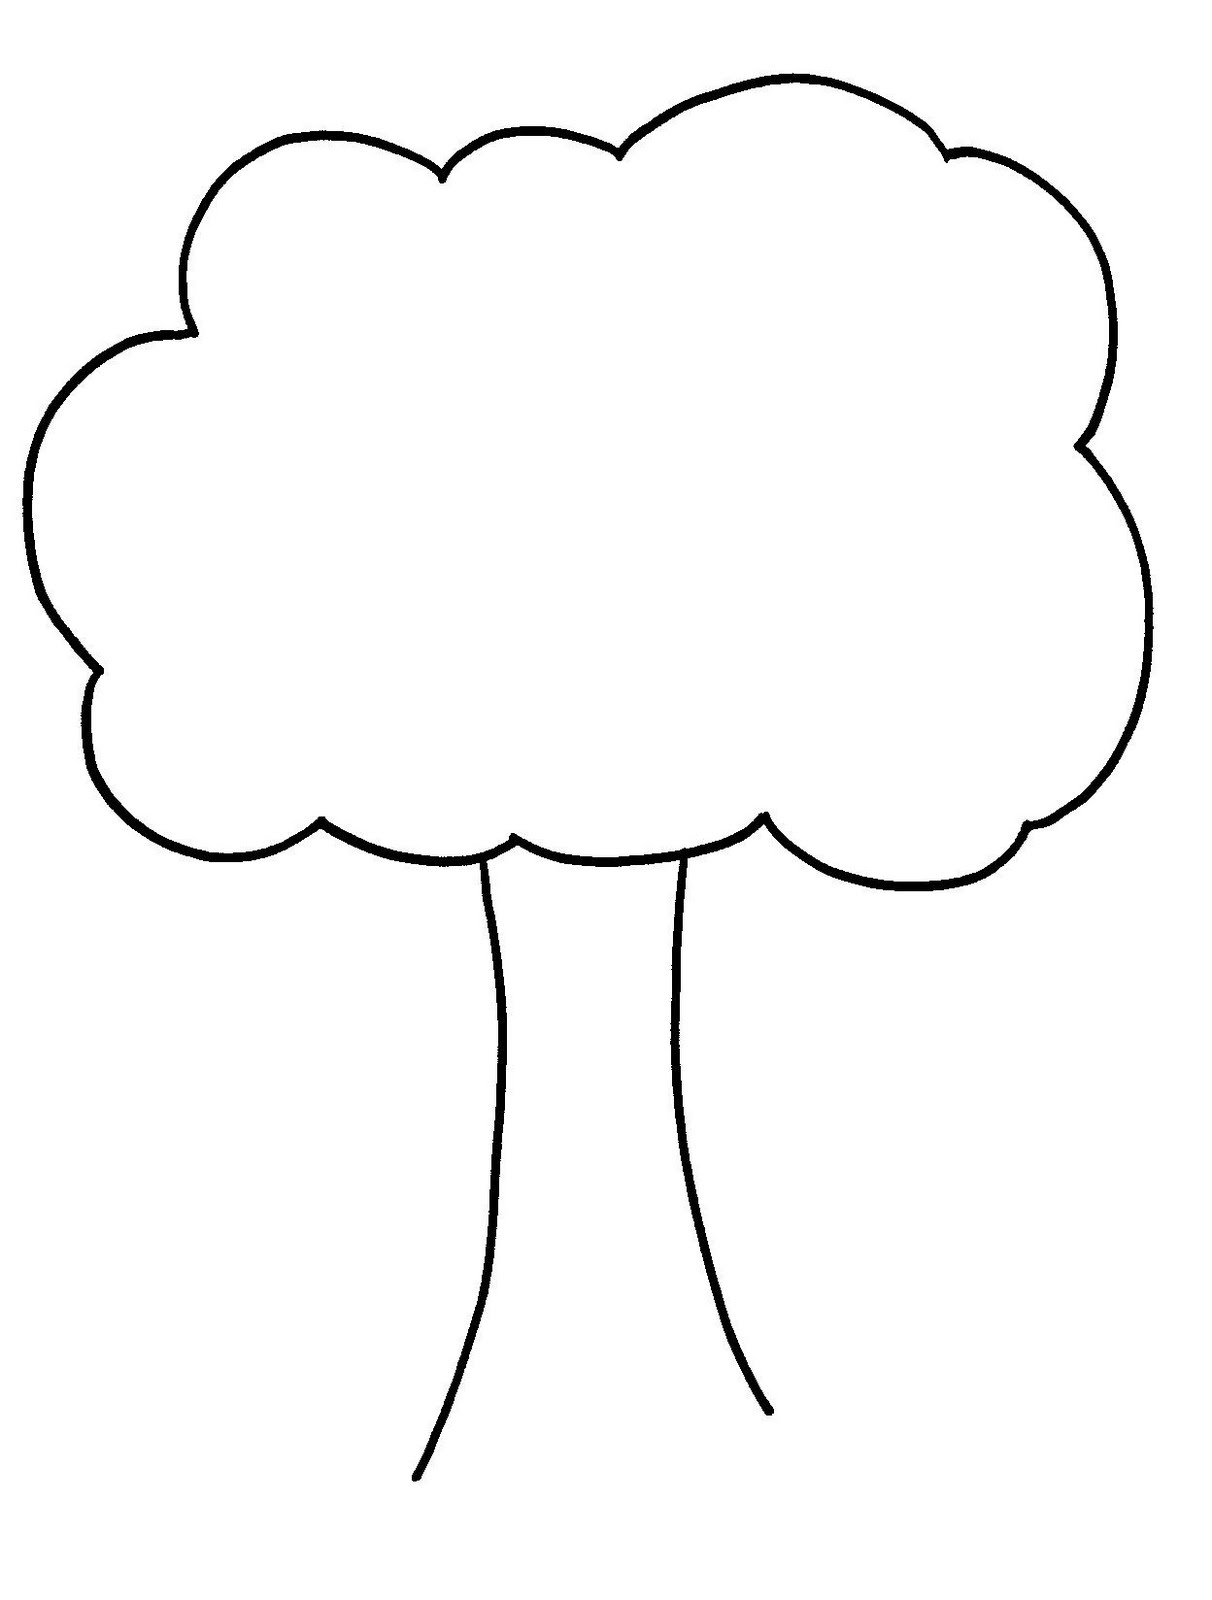 Tree Trunk Coloring Page This Is Your Indexhtml